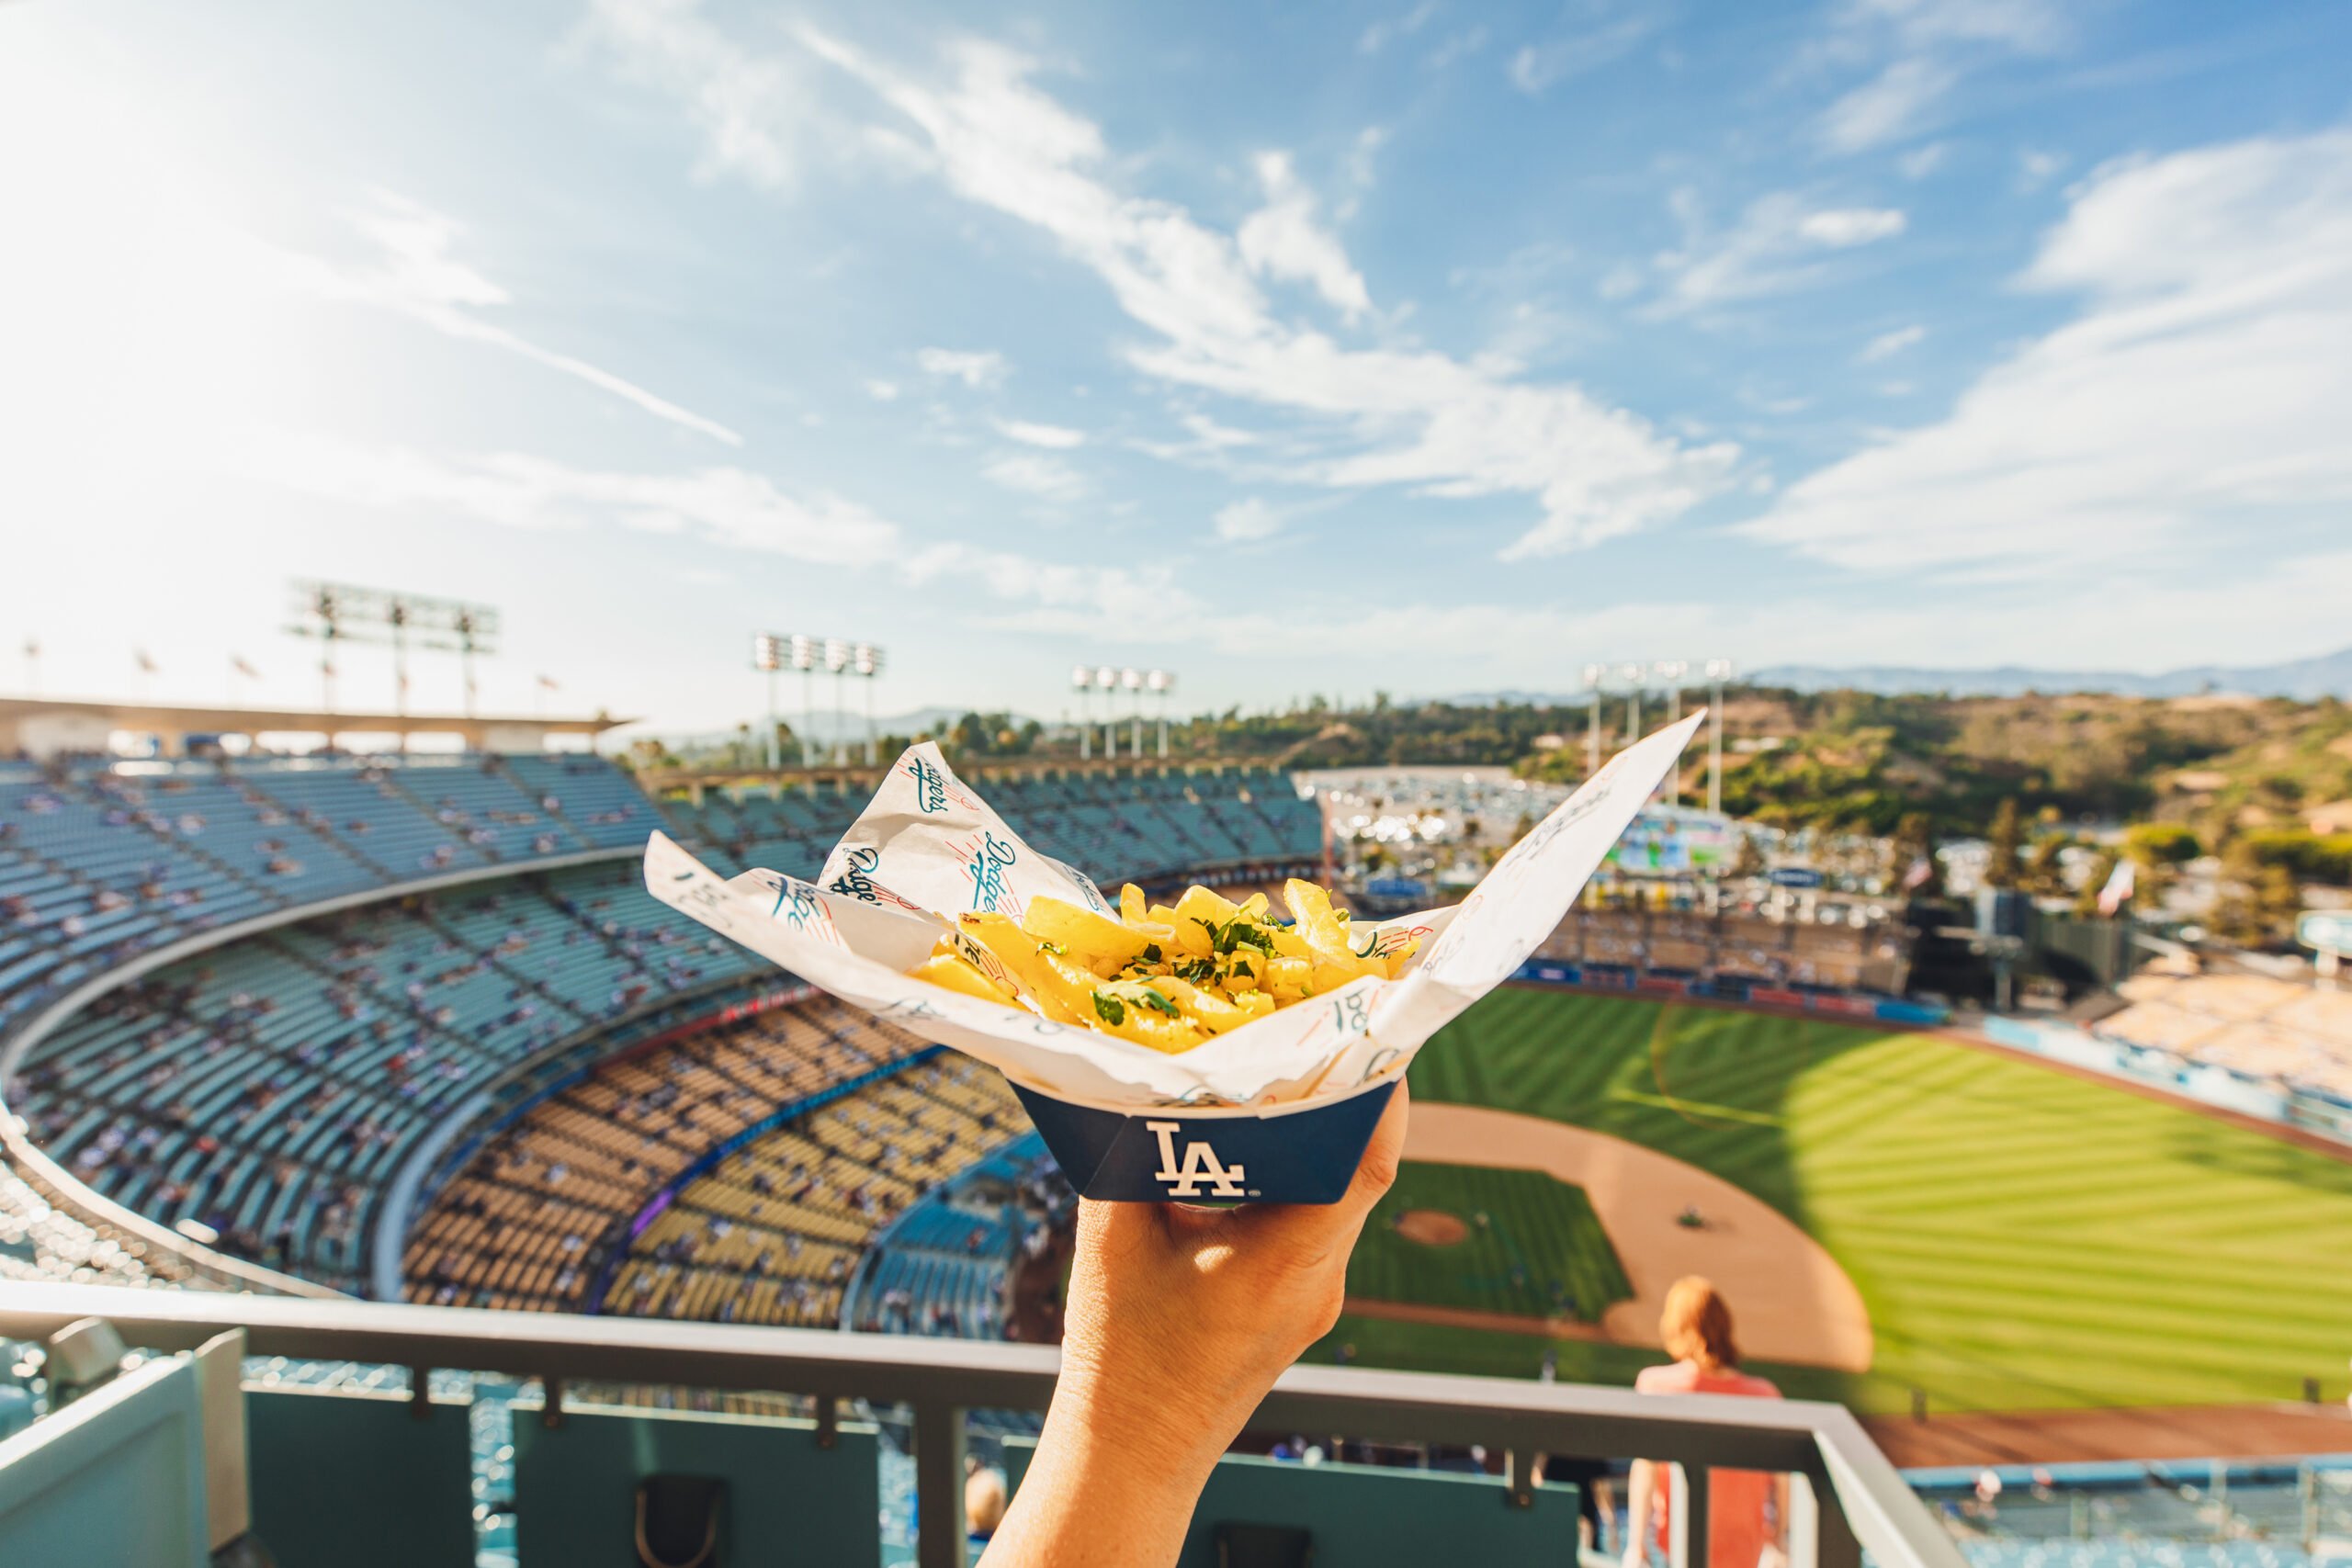 Krystal Thompson's photo of a hand holding up an order of fries overlooking Dodgers stadium on a sunny day.